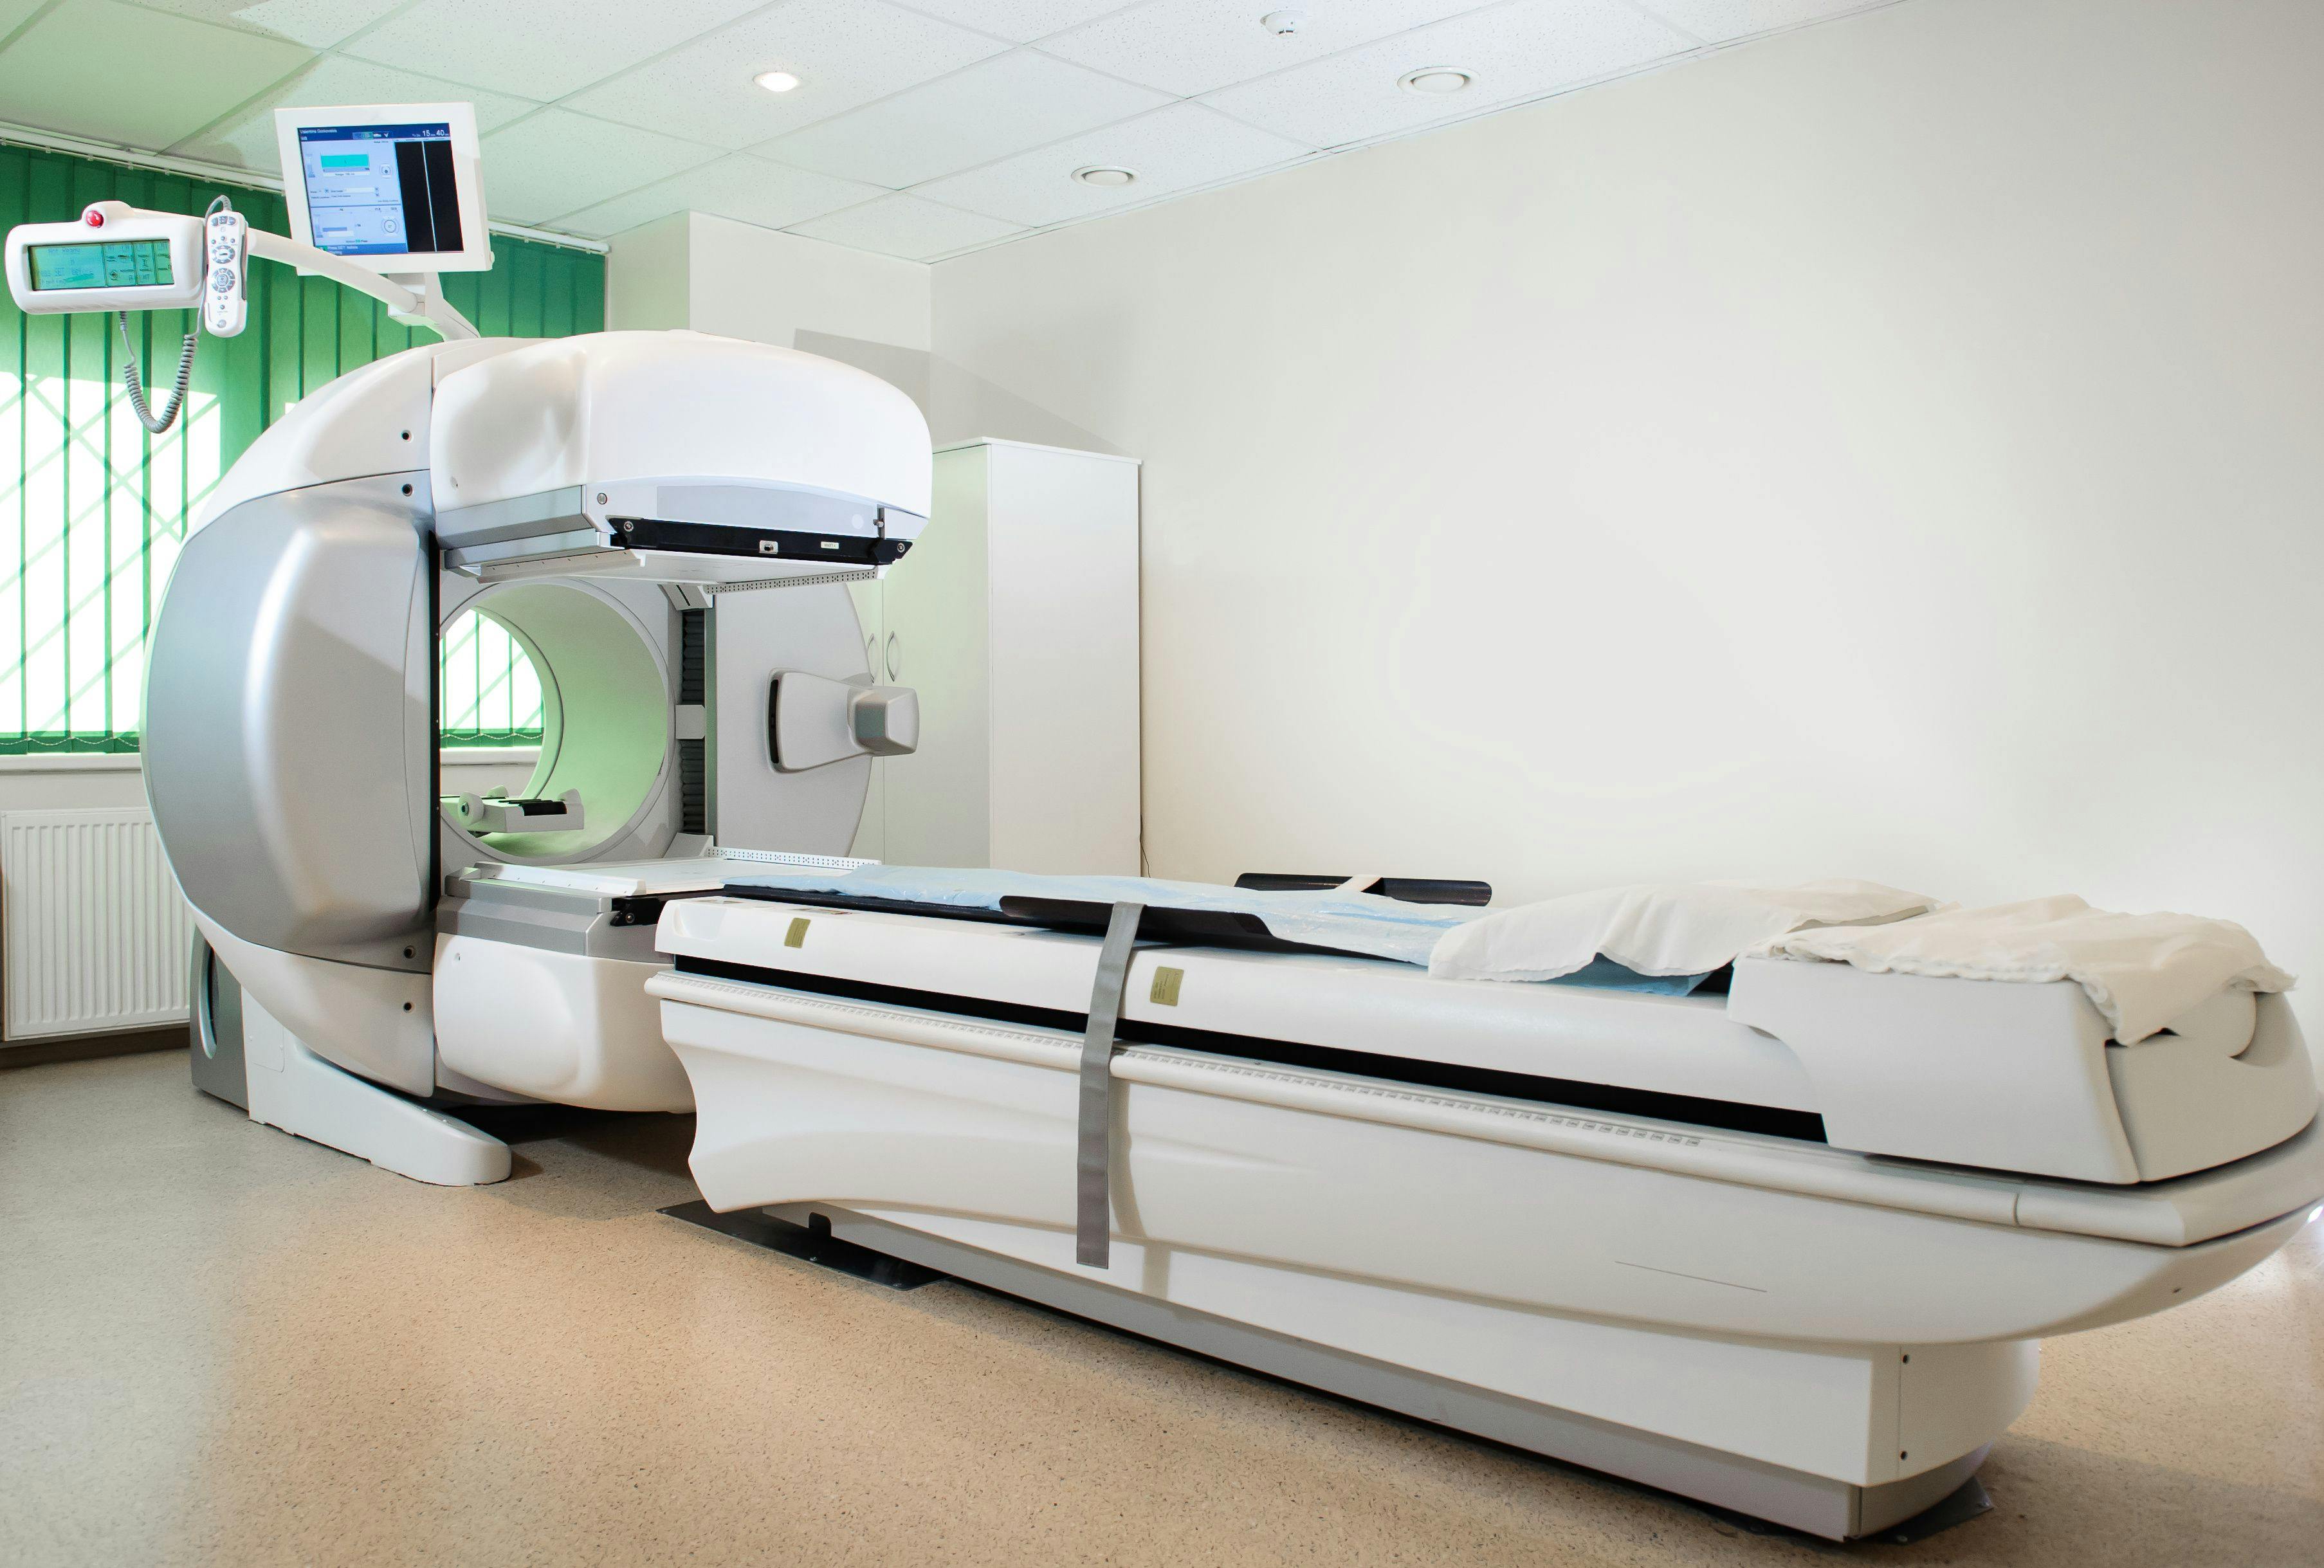 radiation, therapy, prostate cancer, treatment